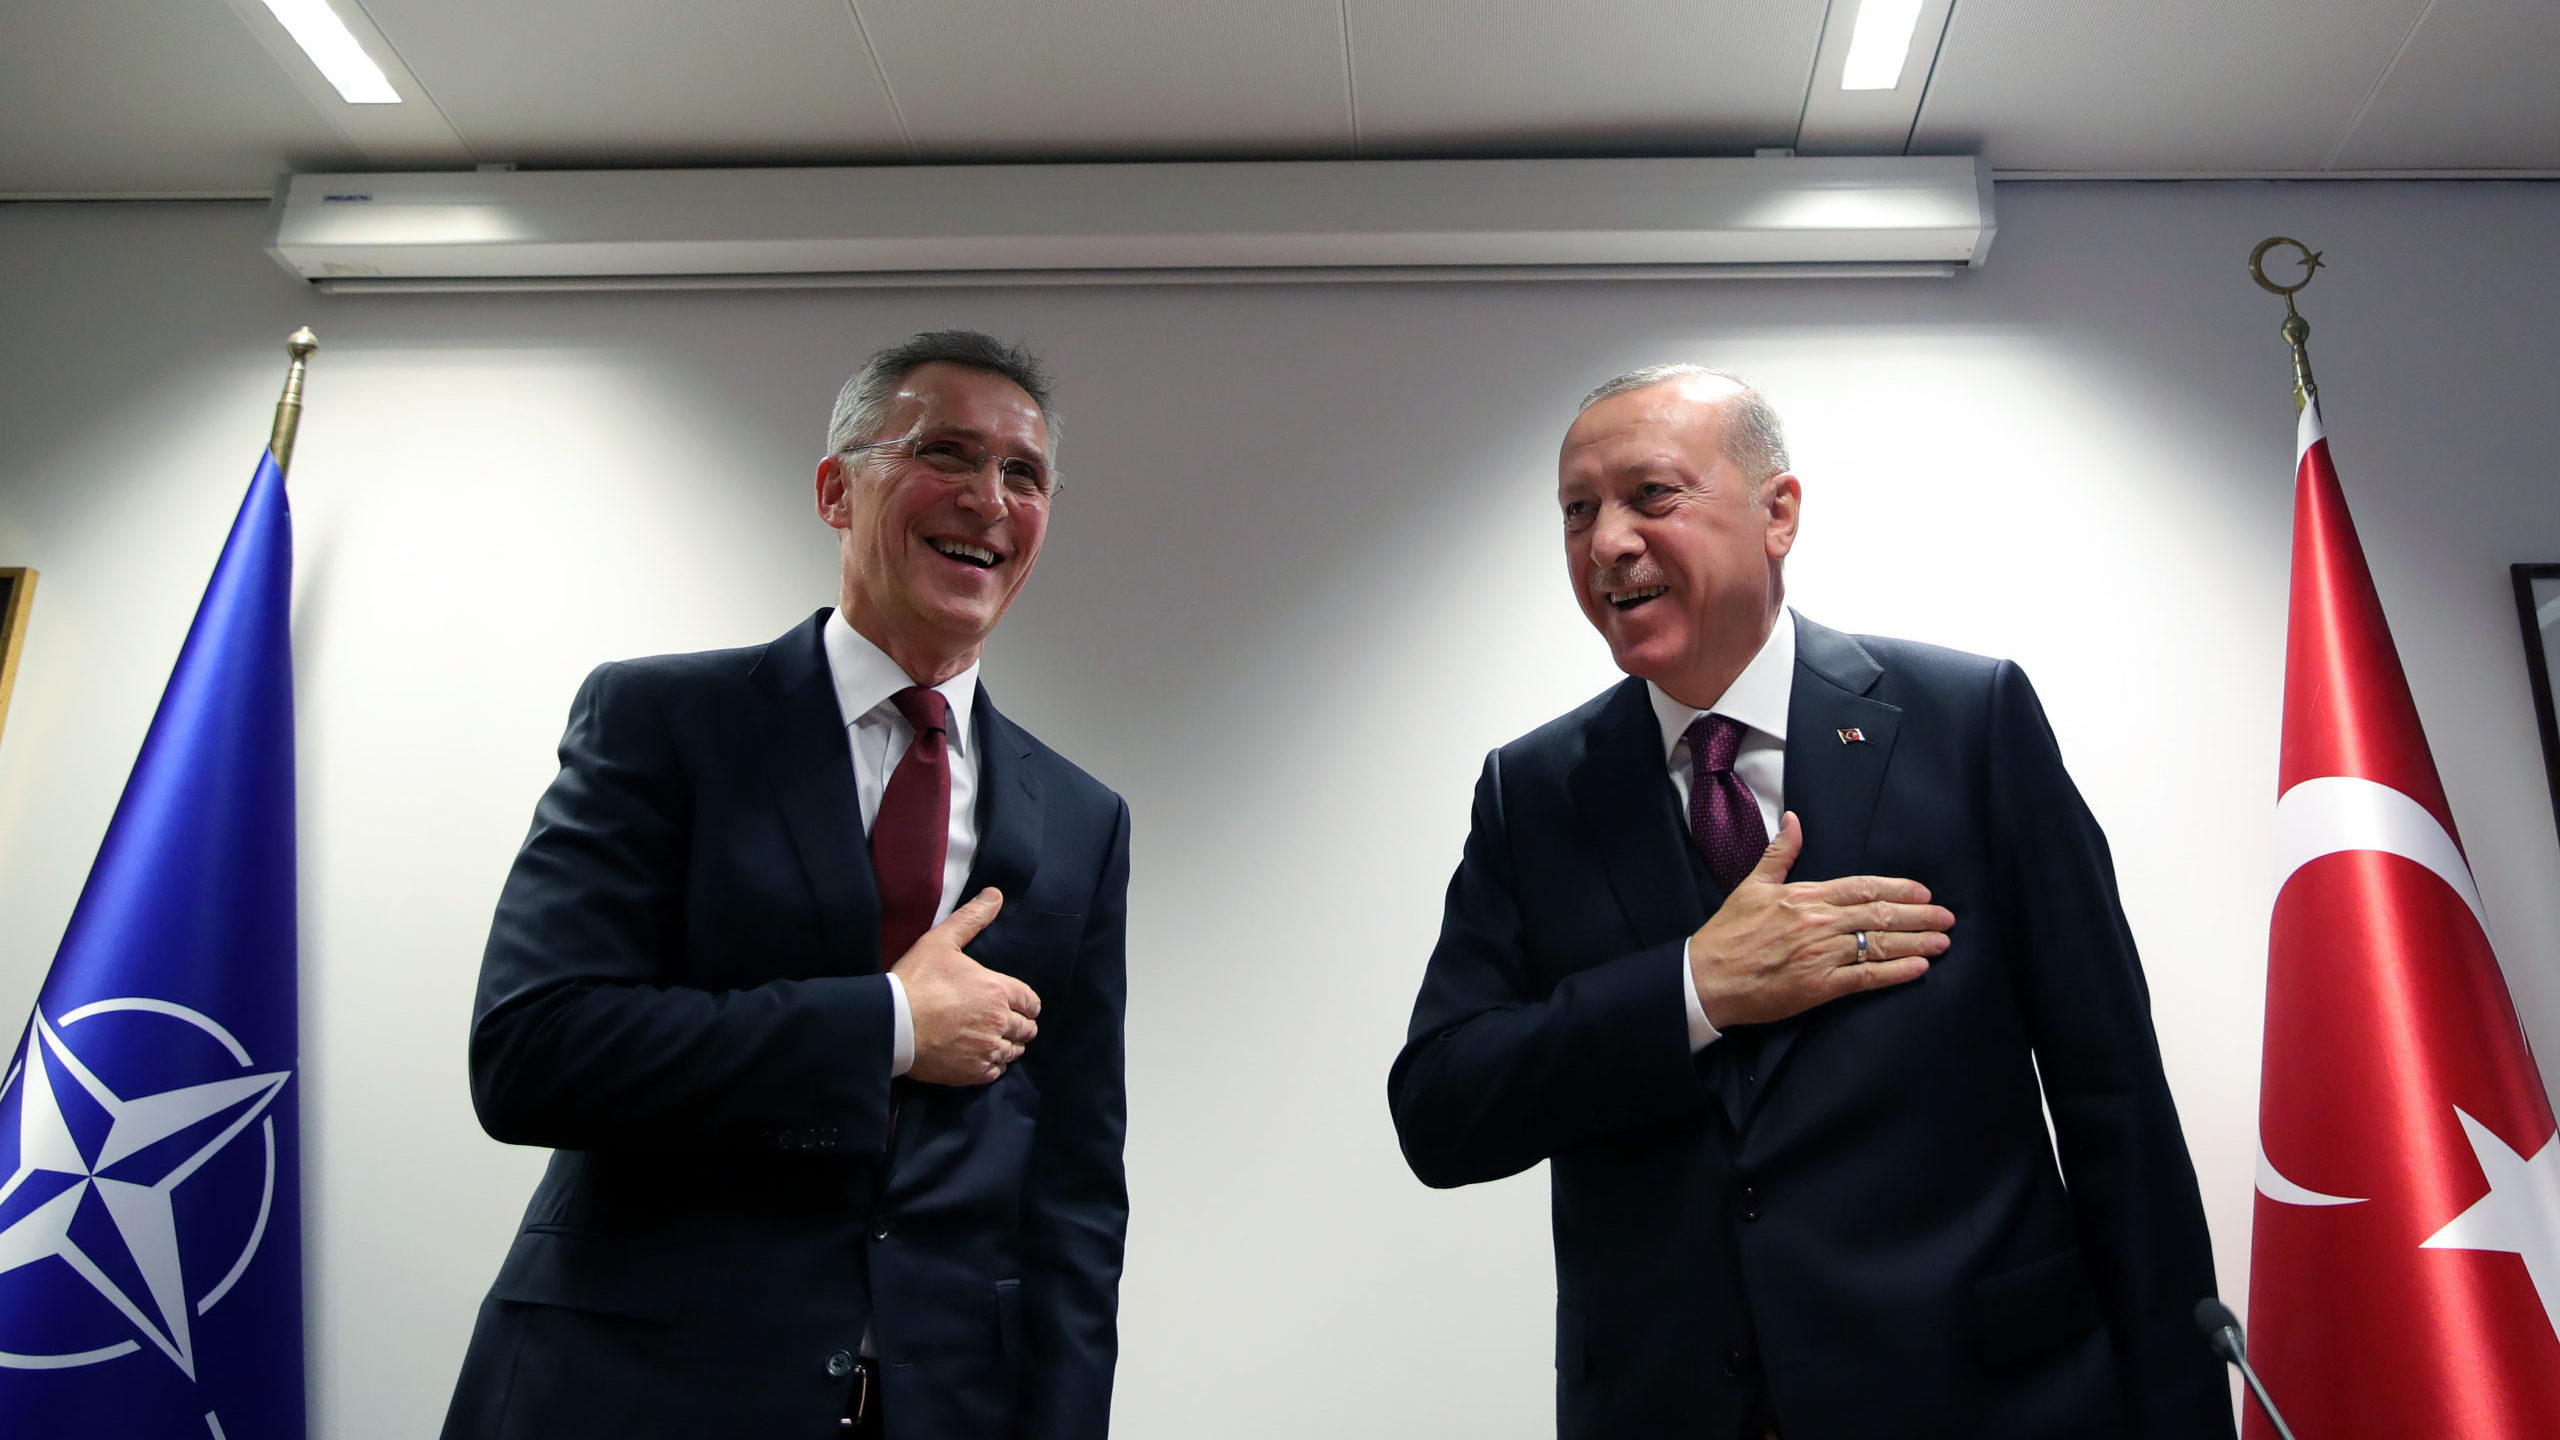 Turkey Moves Closer to West but Strength of Future Ties Still in Doubt